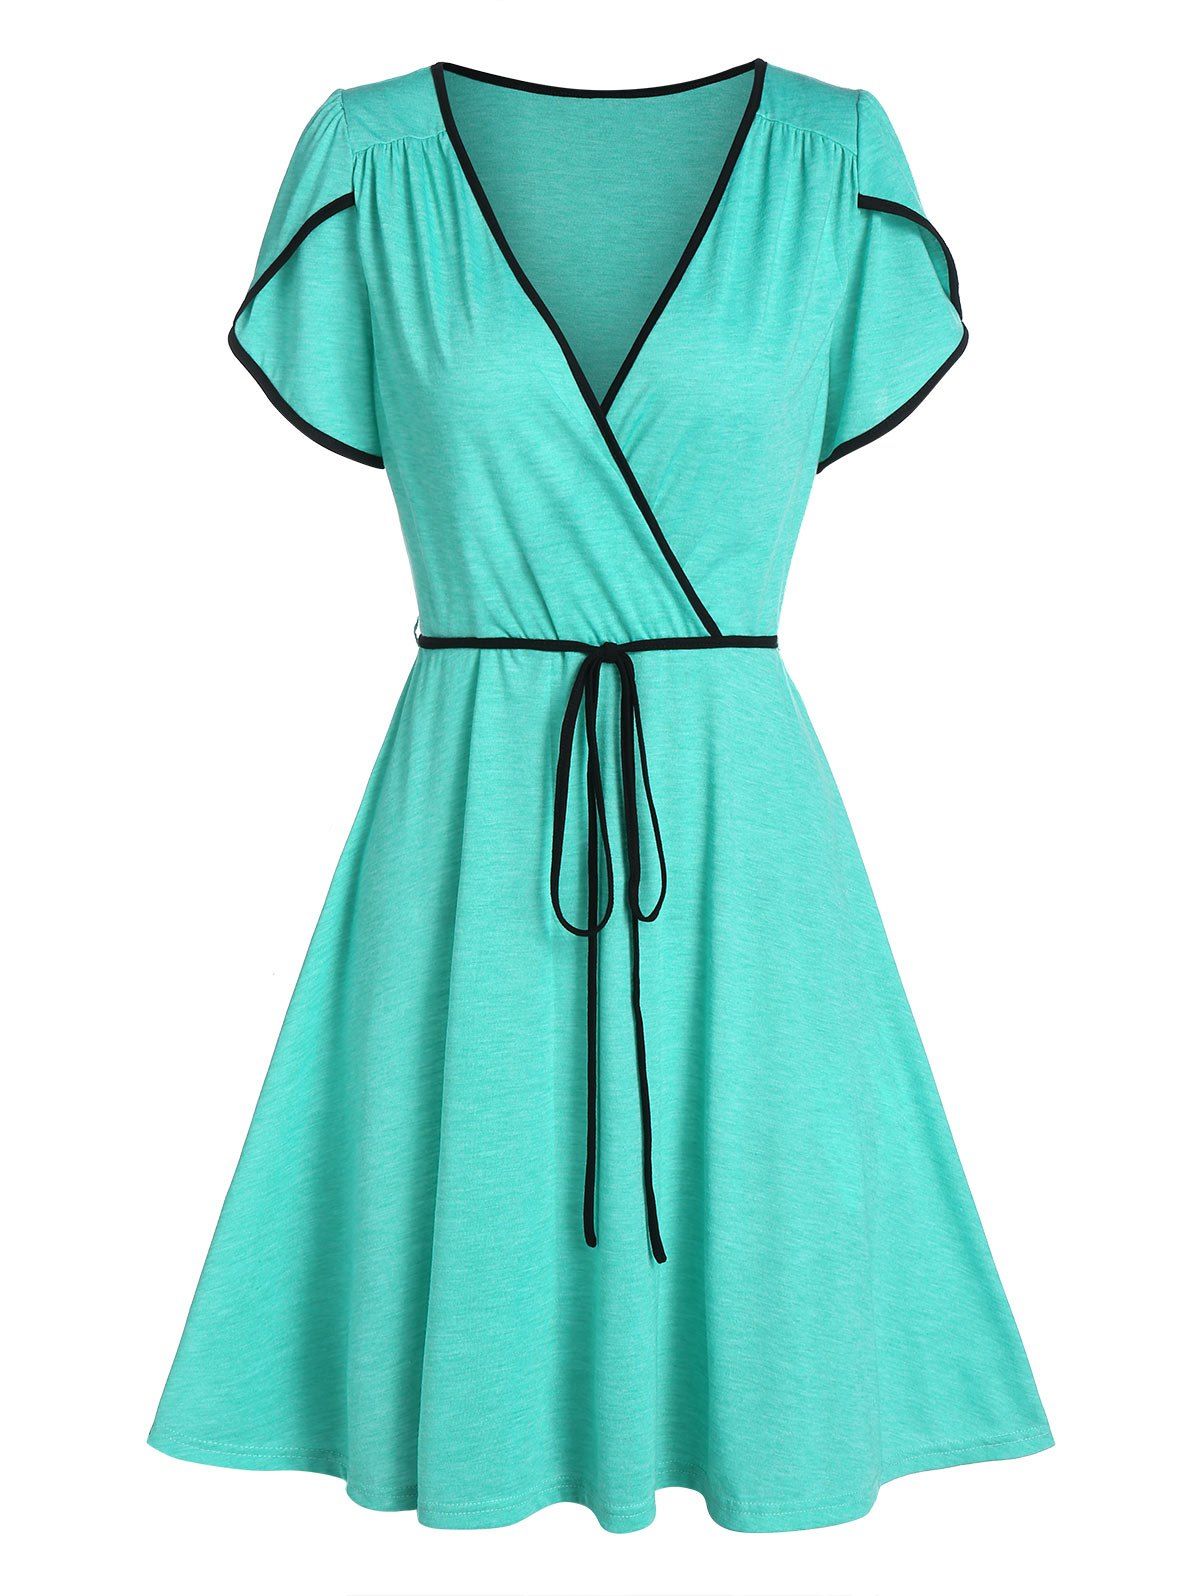 Casual Contrast Binding Dress Surplice Plunging Piping String Belted A Line Dress - AQUAMARINE M